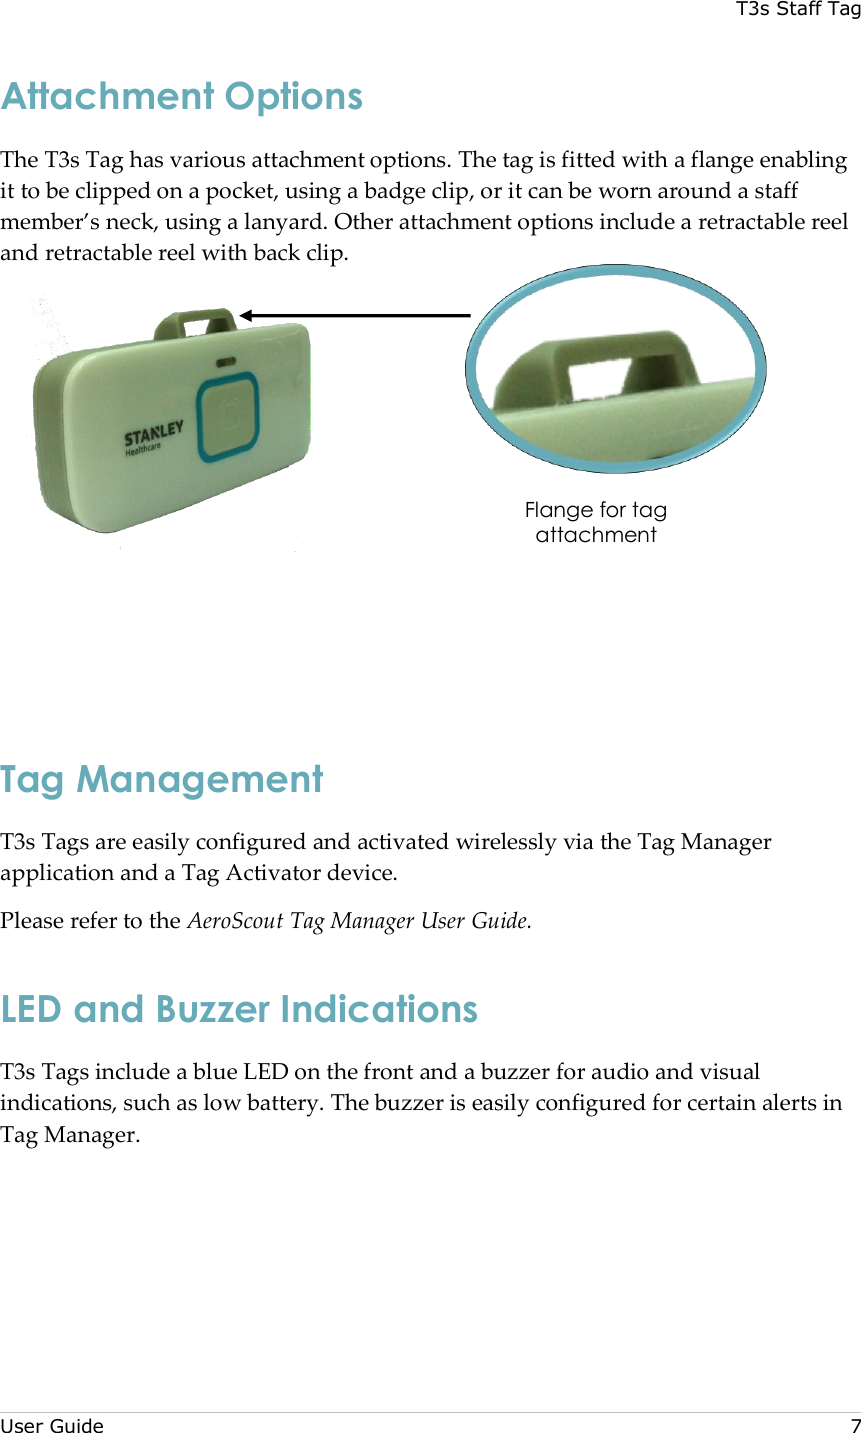 T3s Staff Tag  User Guide     7 Attachment Options The T3s Tag has various attachment options. The tag is fitted with a flange enabling it to be clipped on a pocket, using a badge clip, or it can be worn around a staff member’s neck, using a lanyard. Other attachment options include a retractable reel and retractable reel with back clip.     Tag Management T3s Tags are easily configured and activated wirelessly via the Tag Manager application and a Tag Activator device. Please refer to the AeroScout Tag Manager User Guide. LED and Buzzer Indications T3s Tags include a blue LED on the front and a buzzer for audio and visual indications, such as low battery. The buzzer is easily configured for certain alerts in Tag Manager.   Flange for tag attachment 